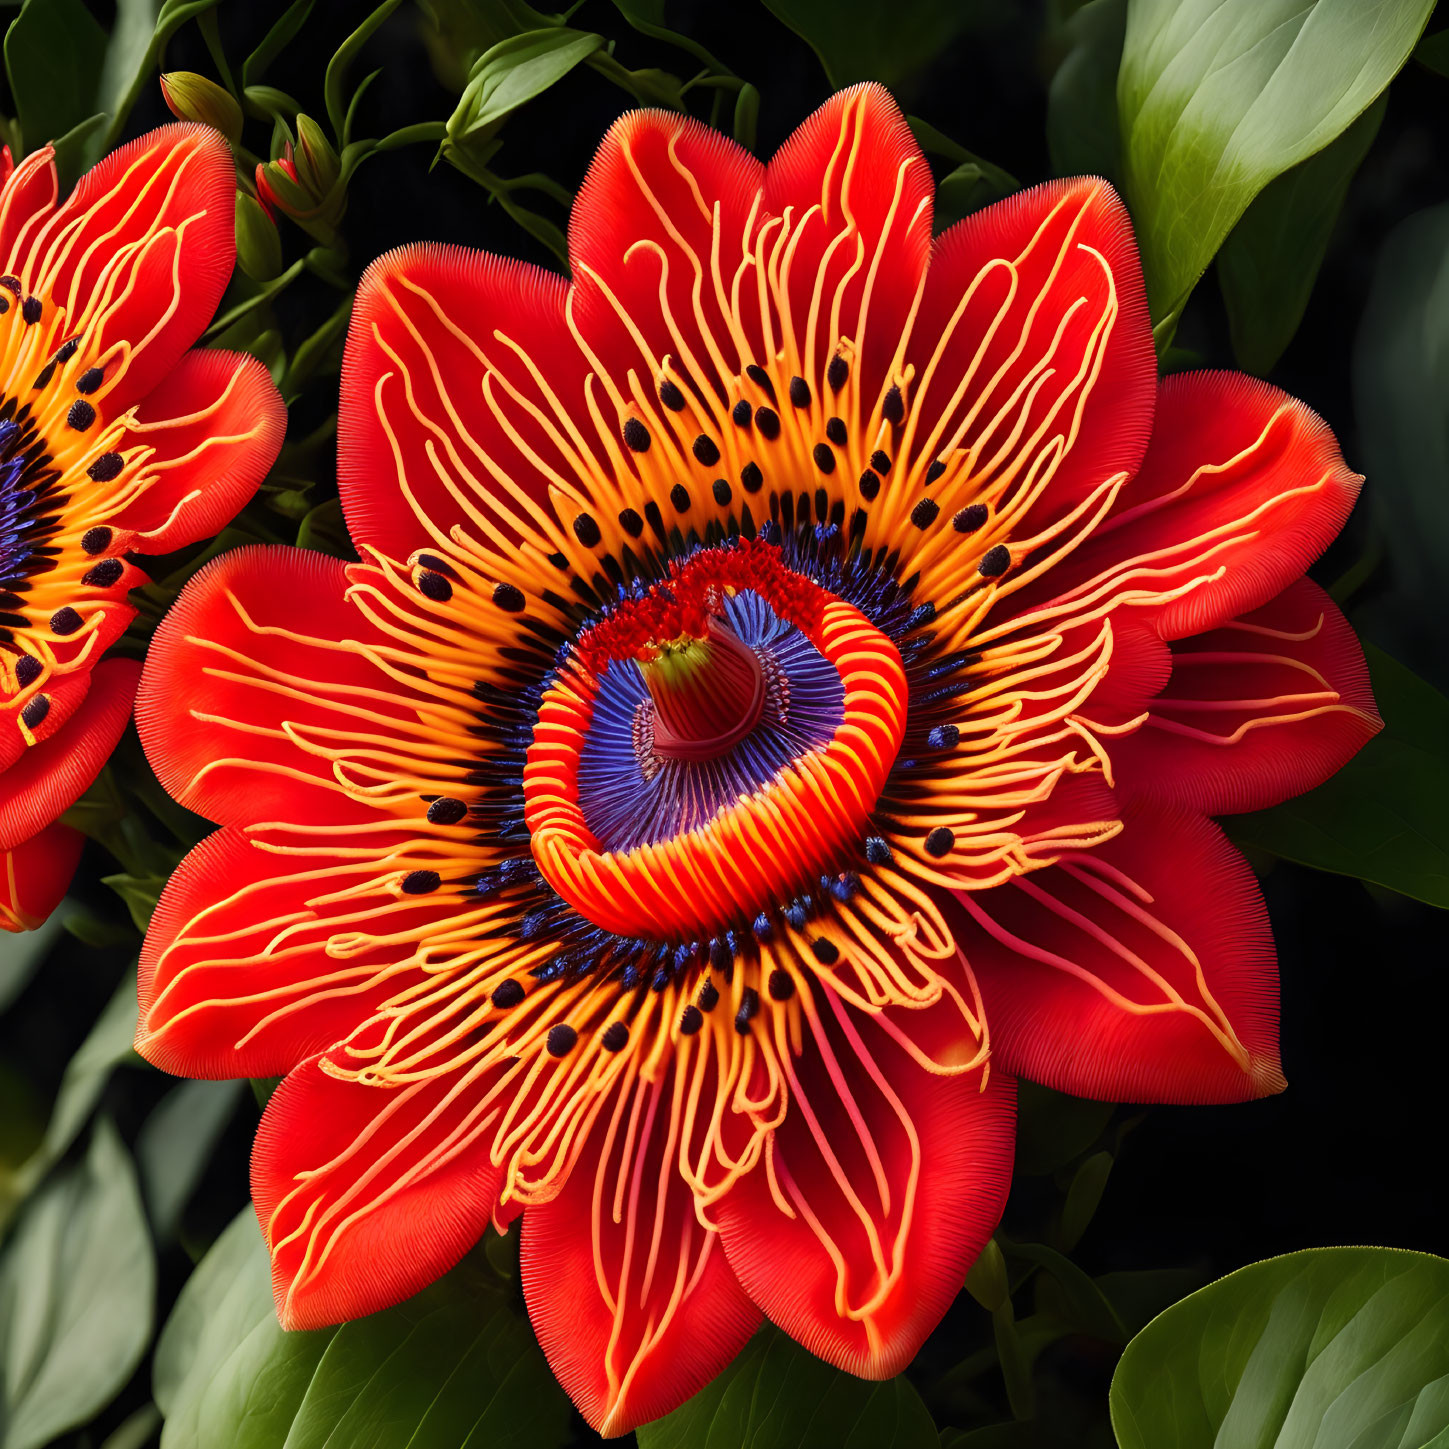 Colorful Red and Yellow Passion Flower with Detailed Intricate Design